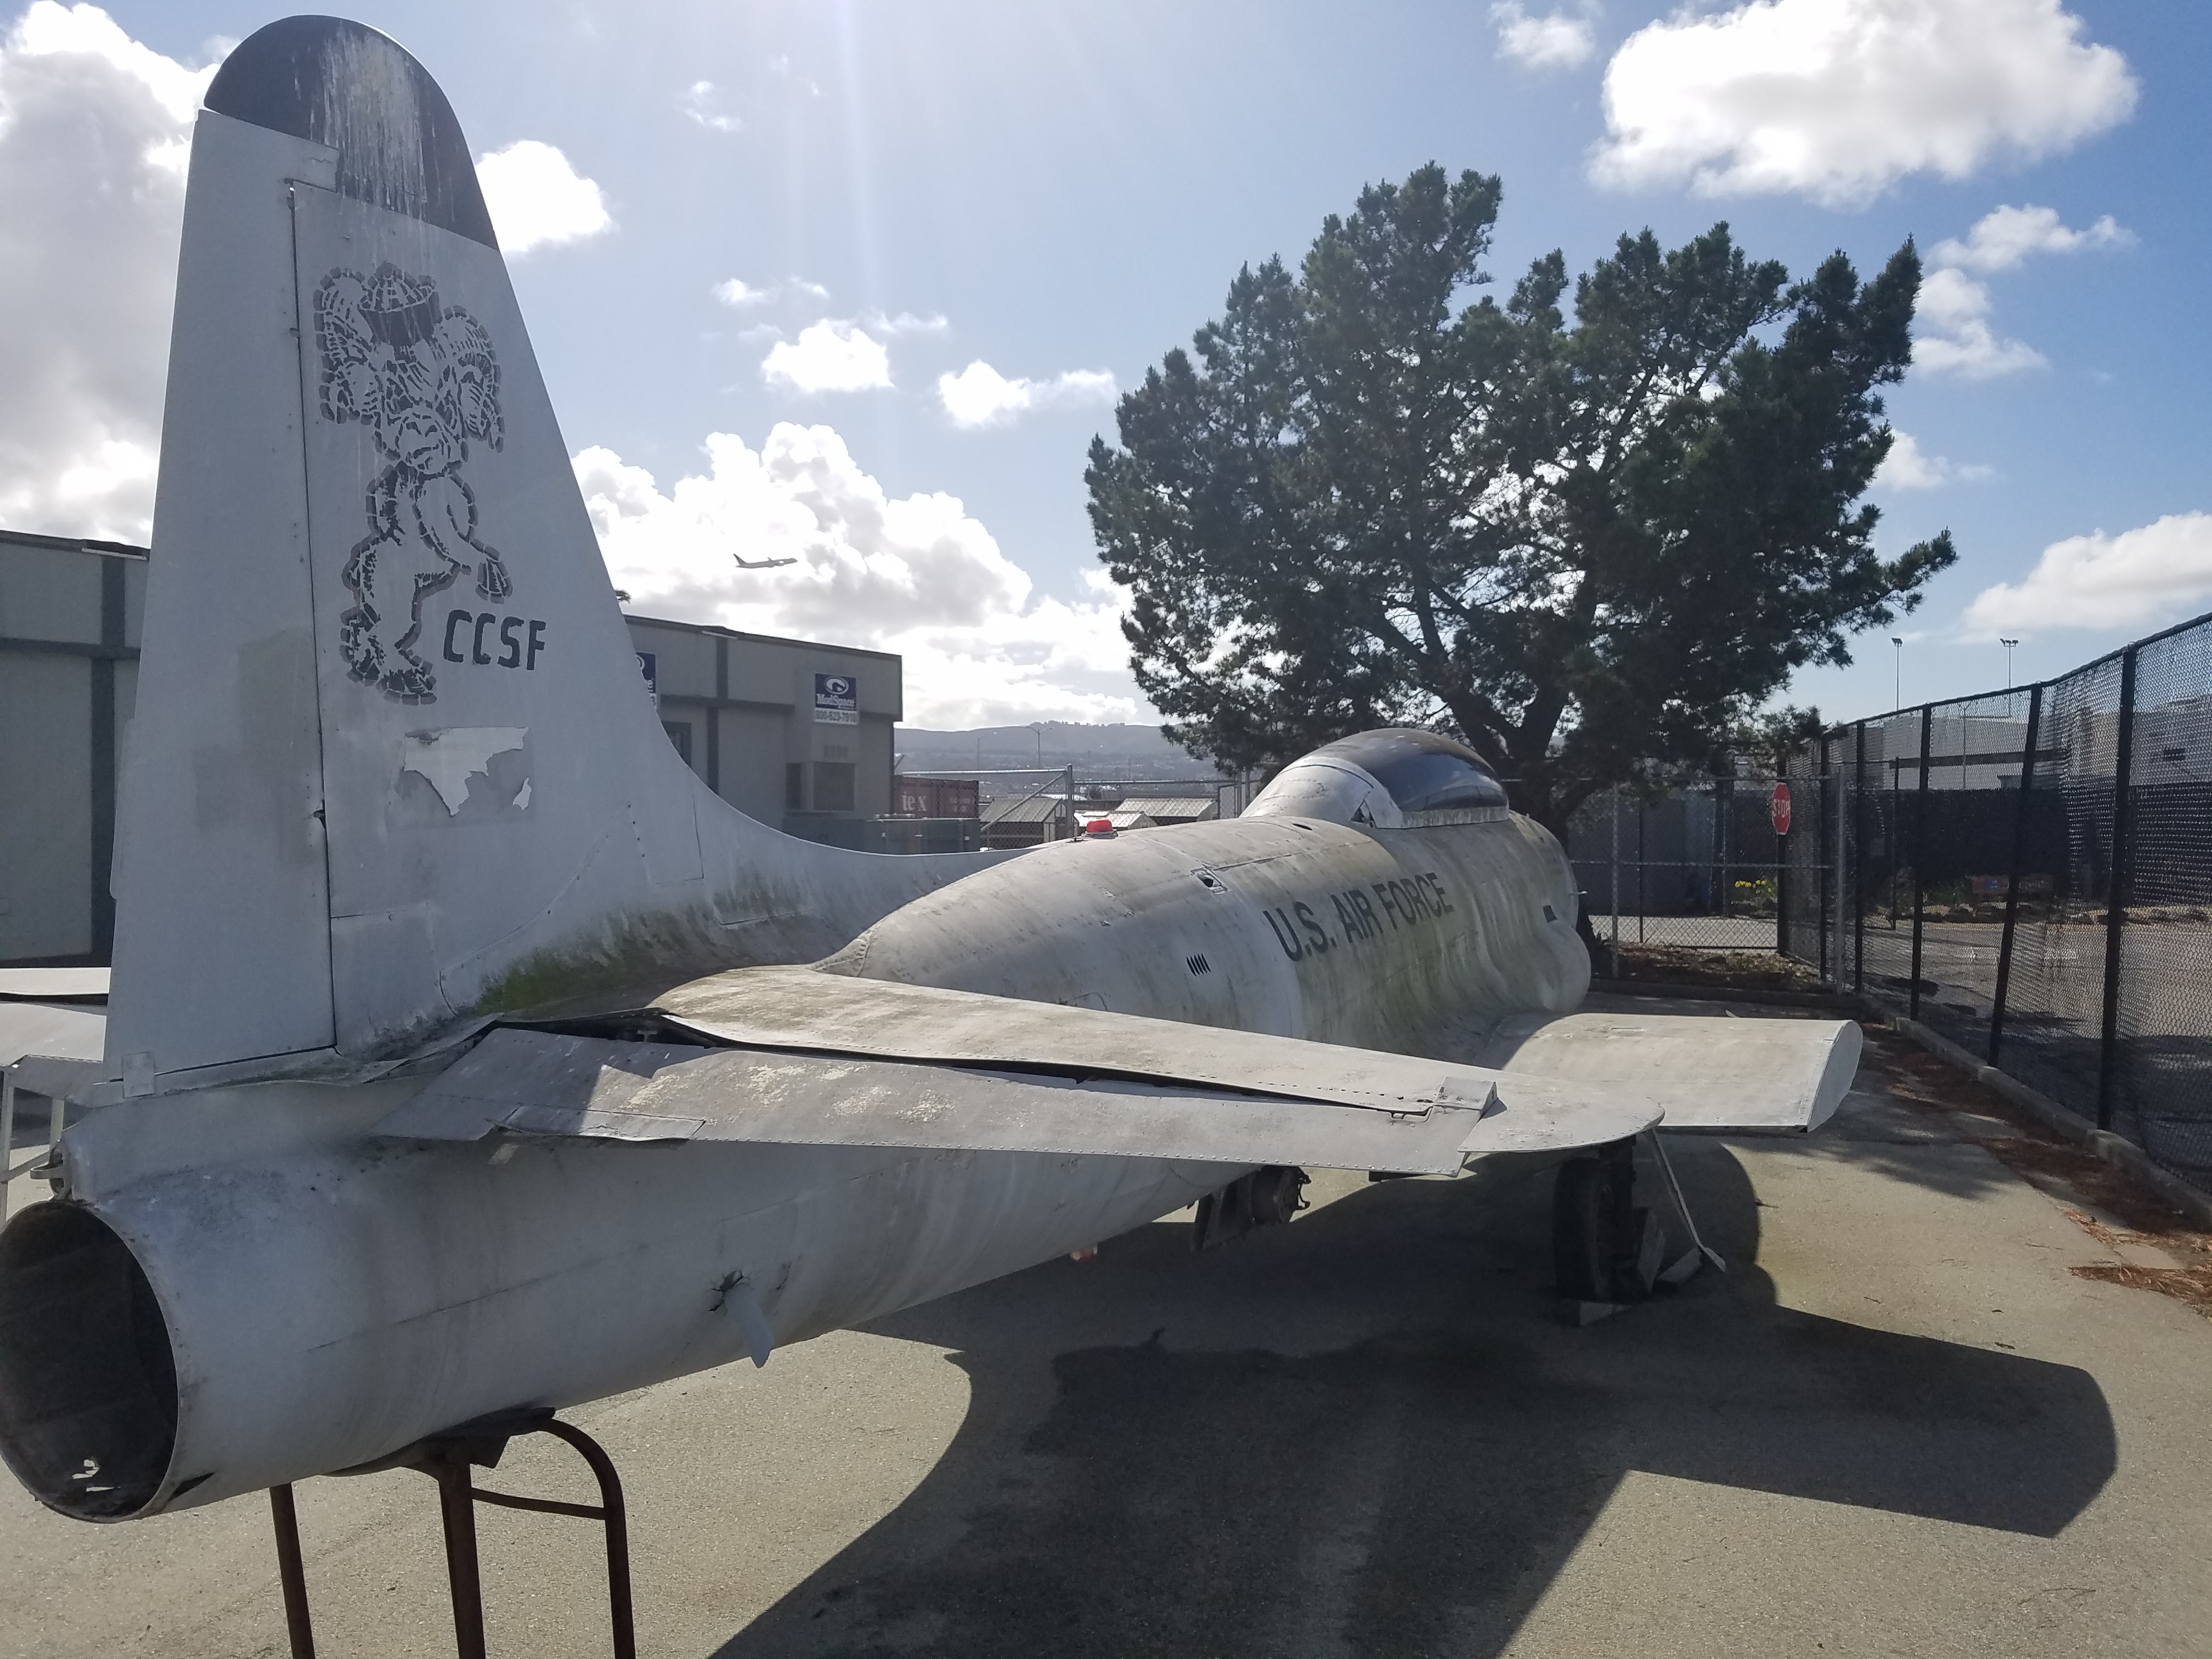 A decommissioned aircraft parked at the Airport Campus on March 16, 2018. Photo by Cameron Ehring/The Guardsman.